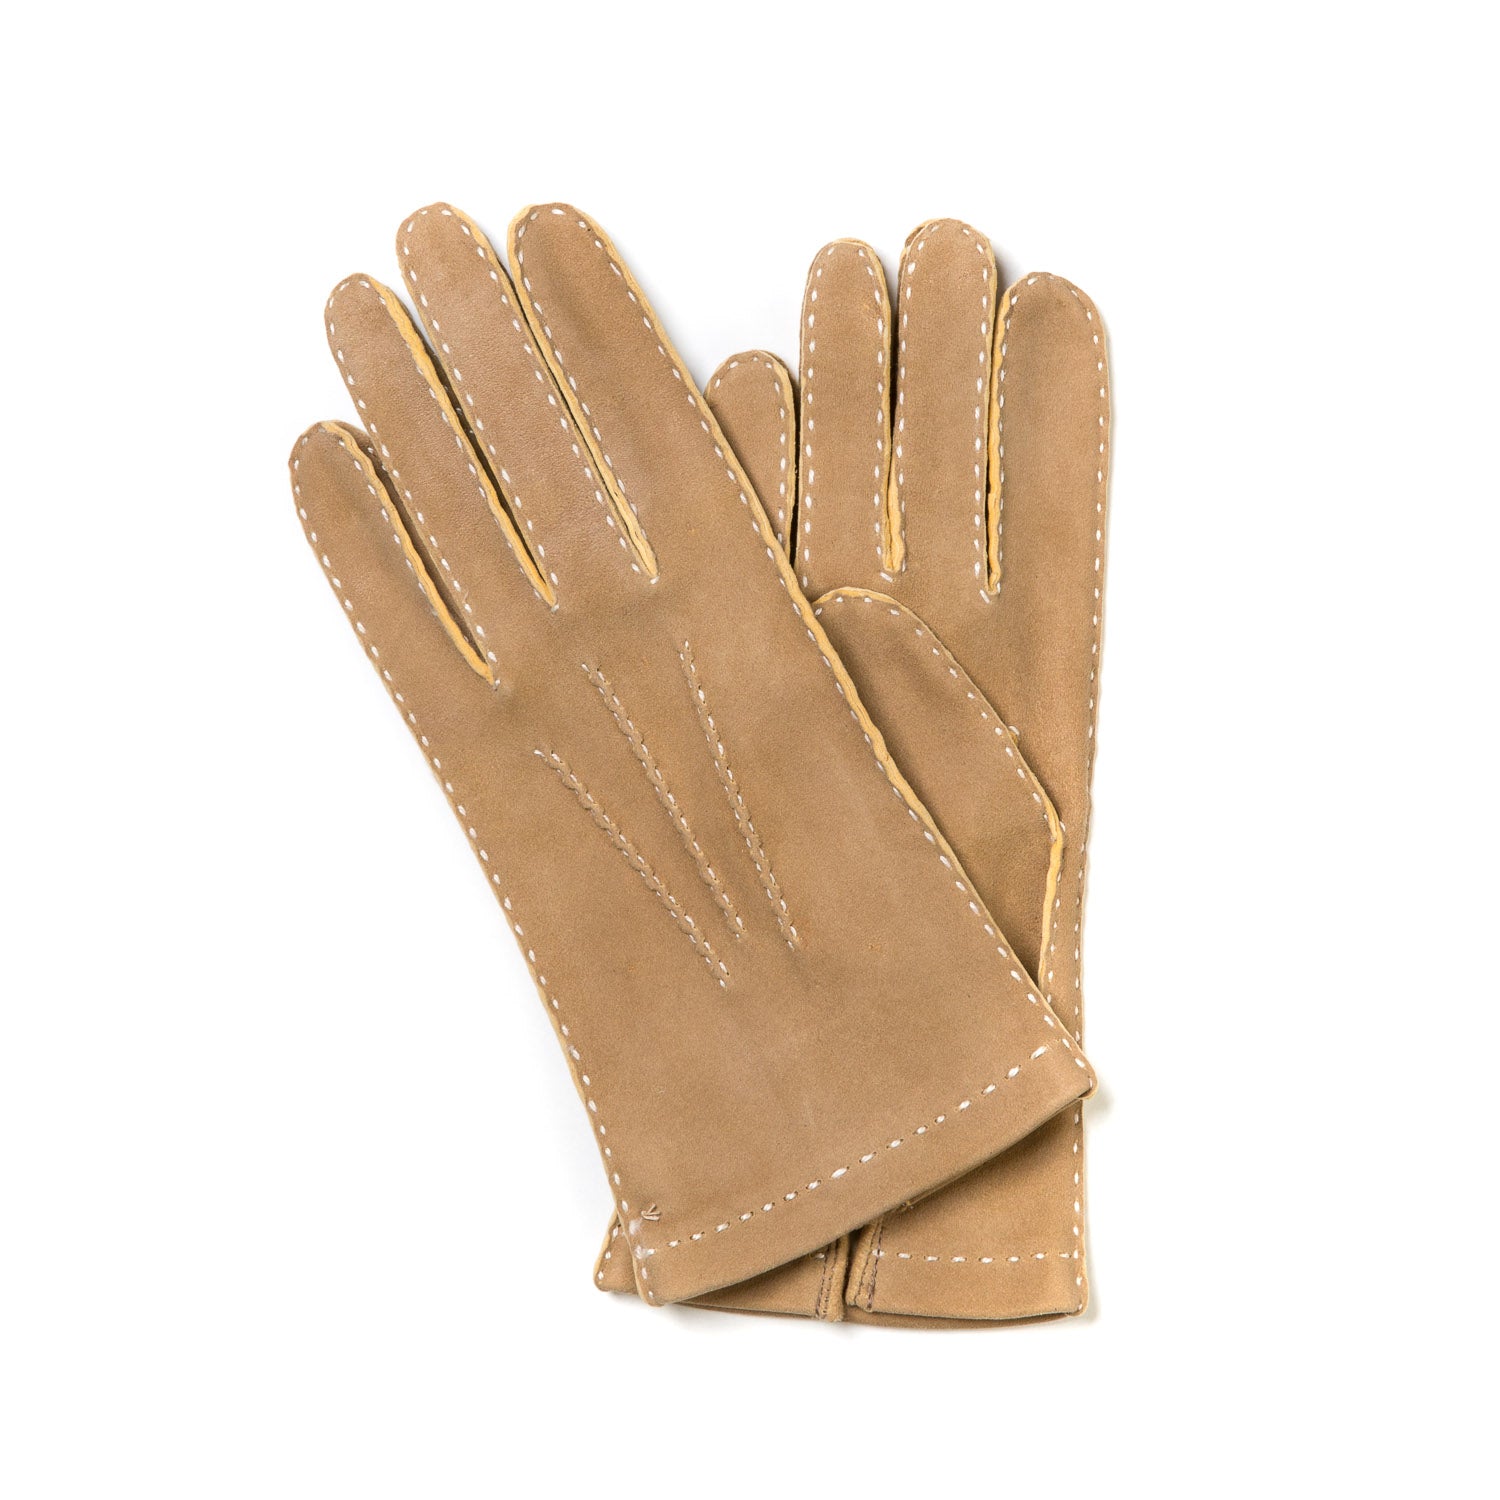 Sand-colored gloves 